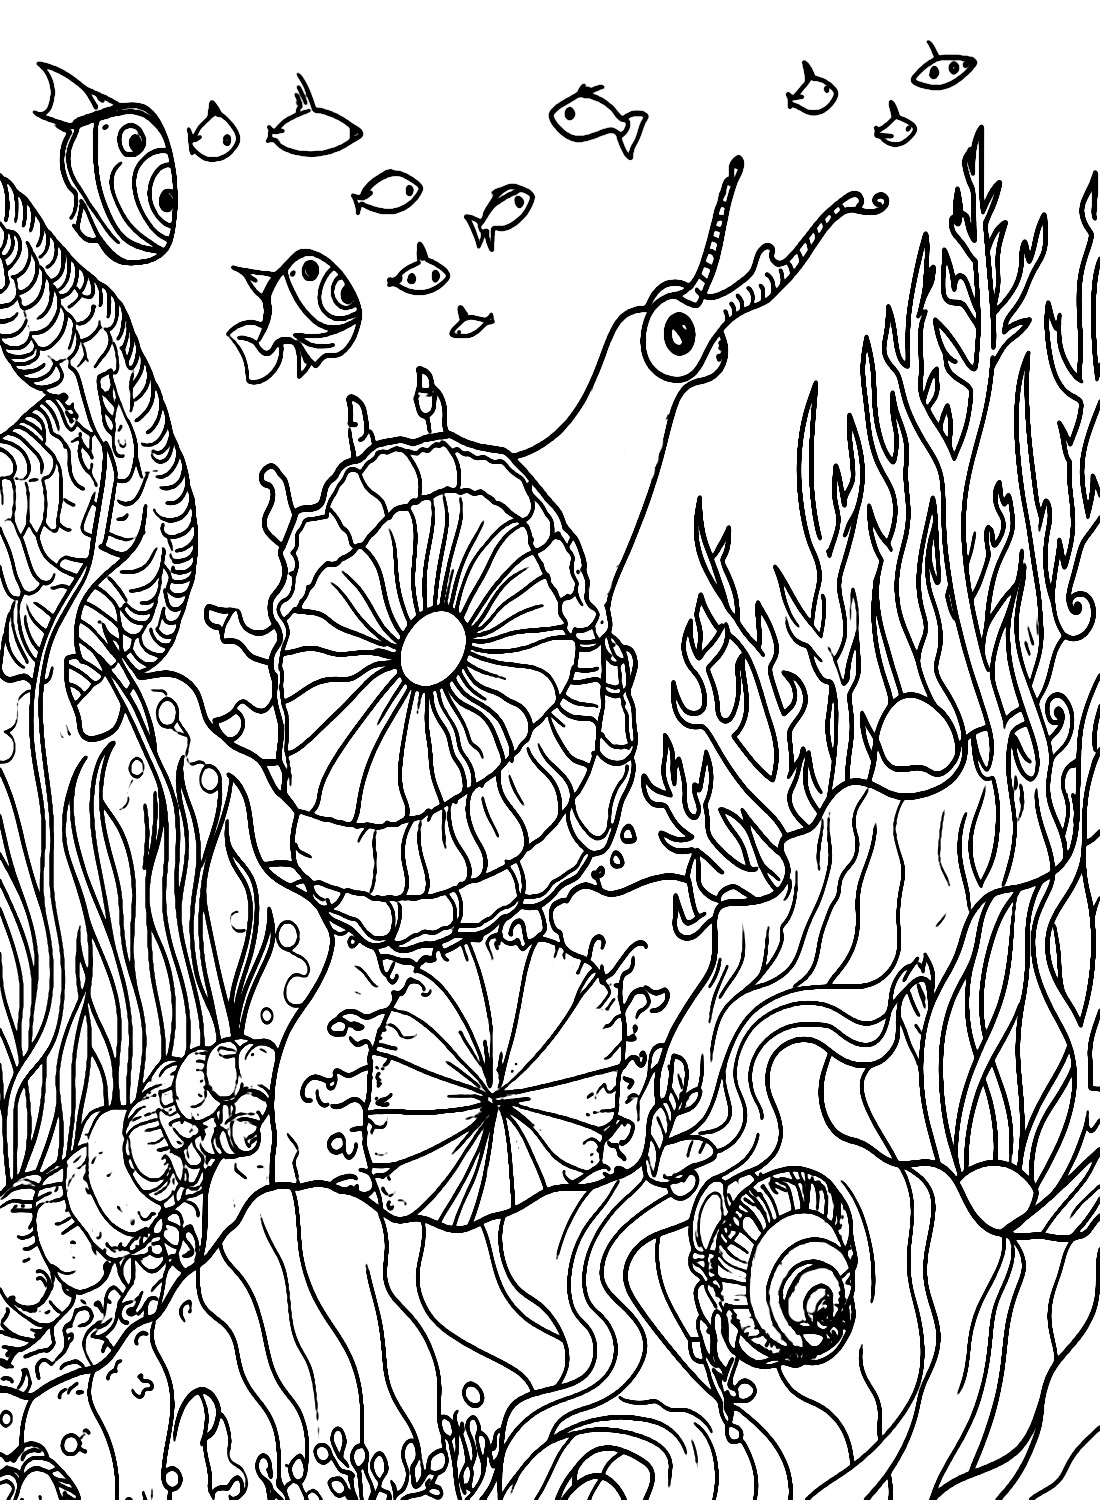 Sea snail swimming among coral reefs Coloring Page